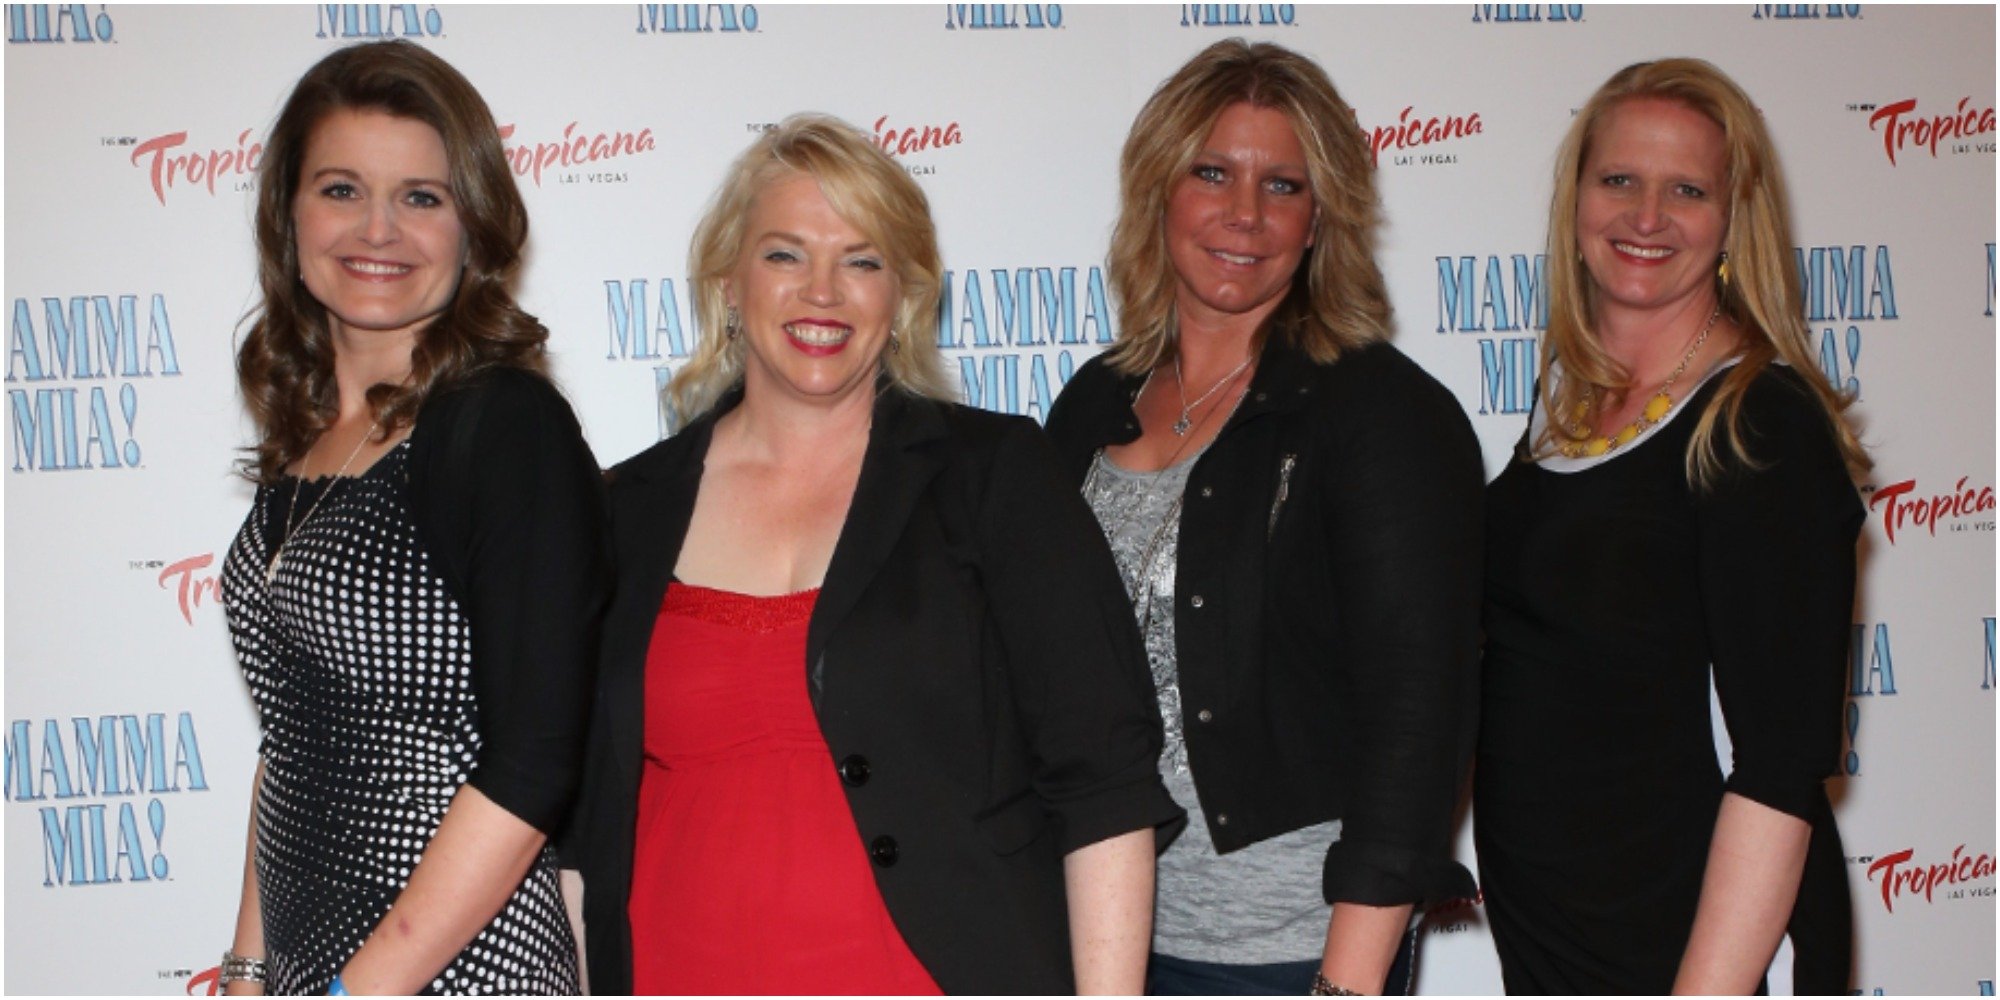 Robyn Brown, Janelle Brown Meri Brown and Christine Brown from "Sister Wives" arrive at the grand opening of the show "Mamma Mia!" at the New Tropicana Las Vegas on May 16, 2014 in Las Vegas, Nevada.